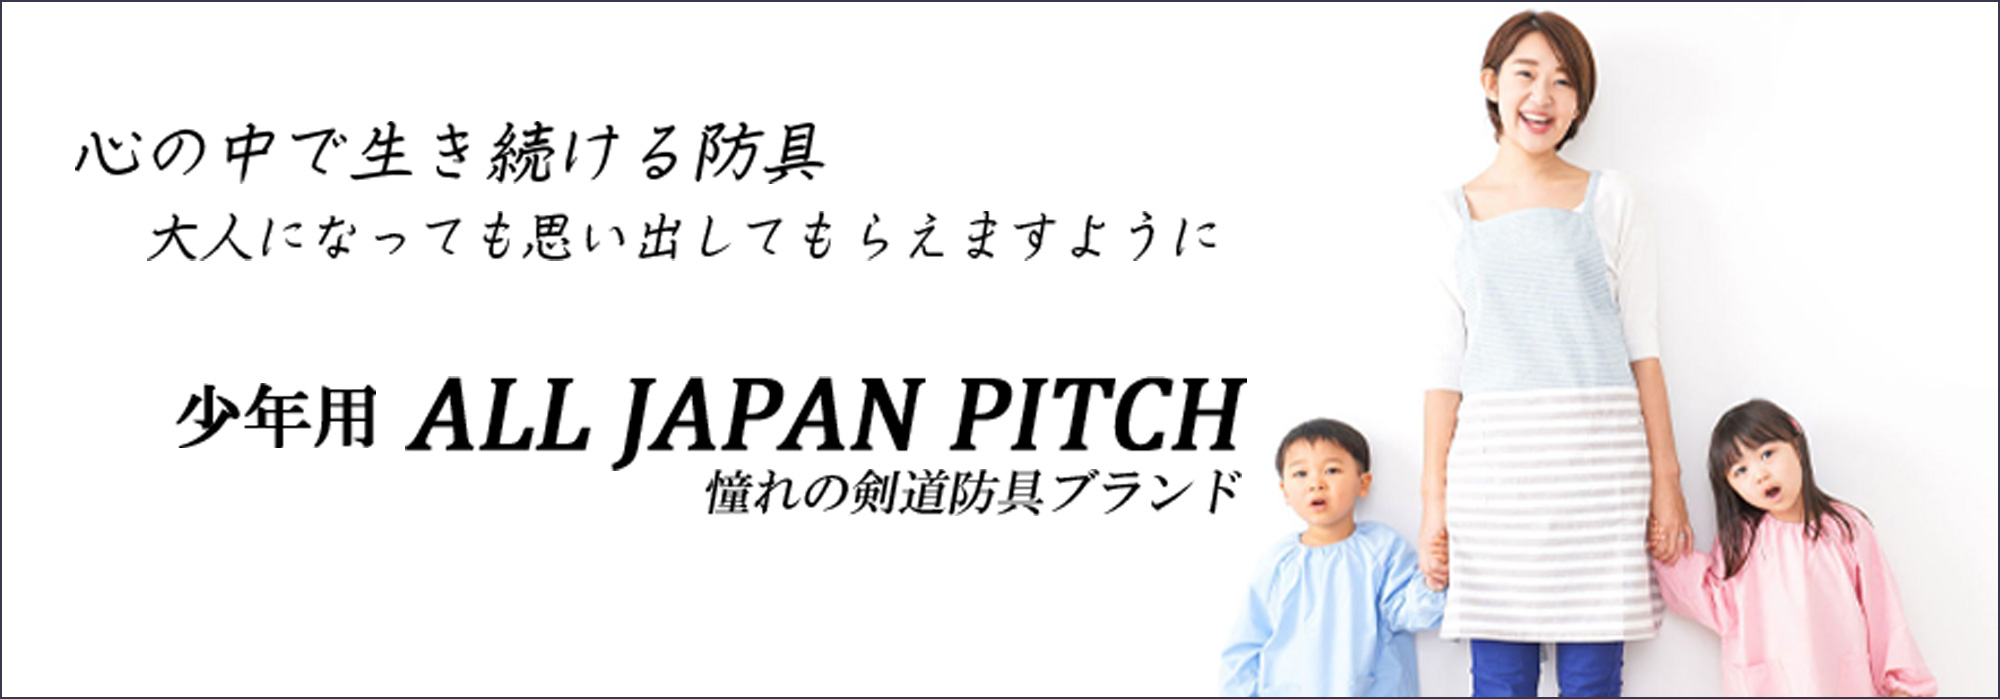 Jrクロスピッチ 2023 New ALL JAPAN PITCH